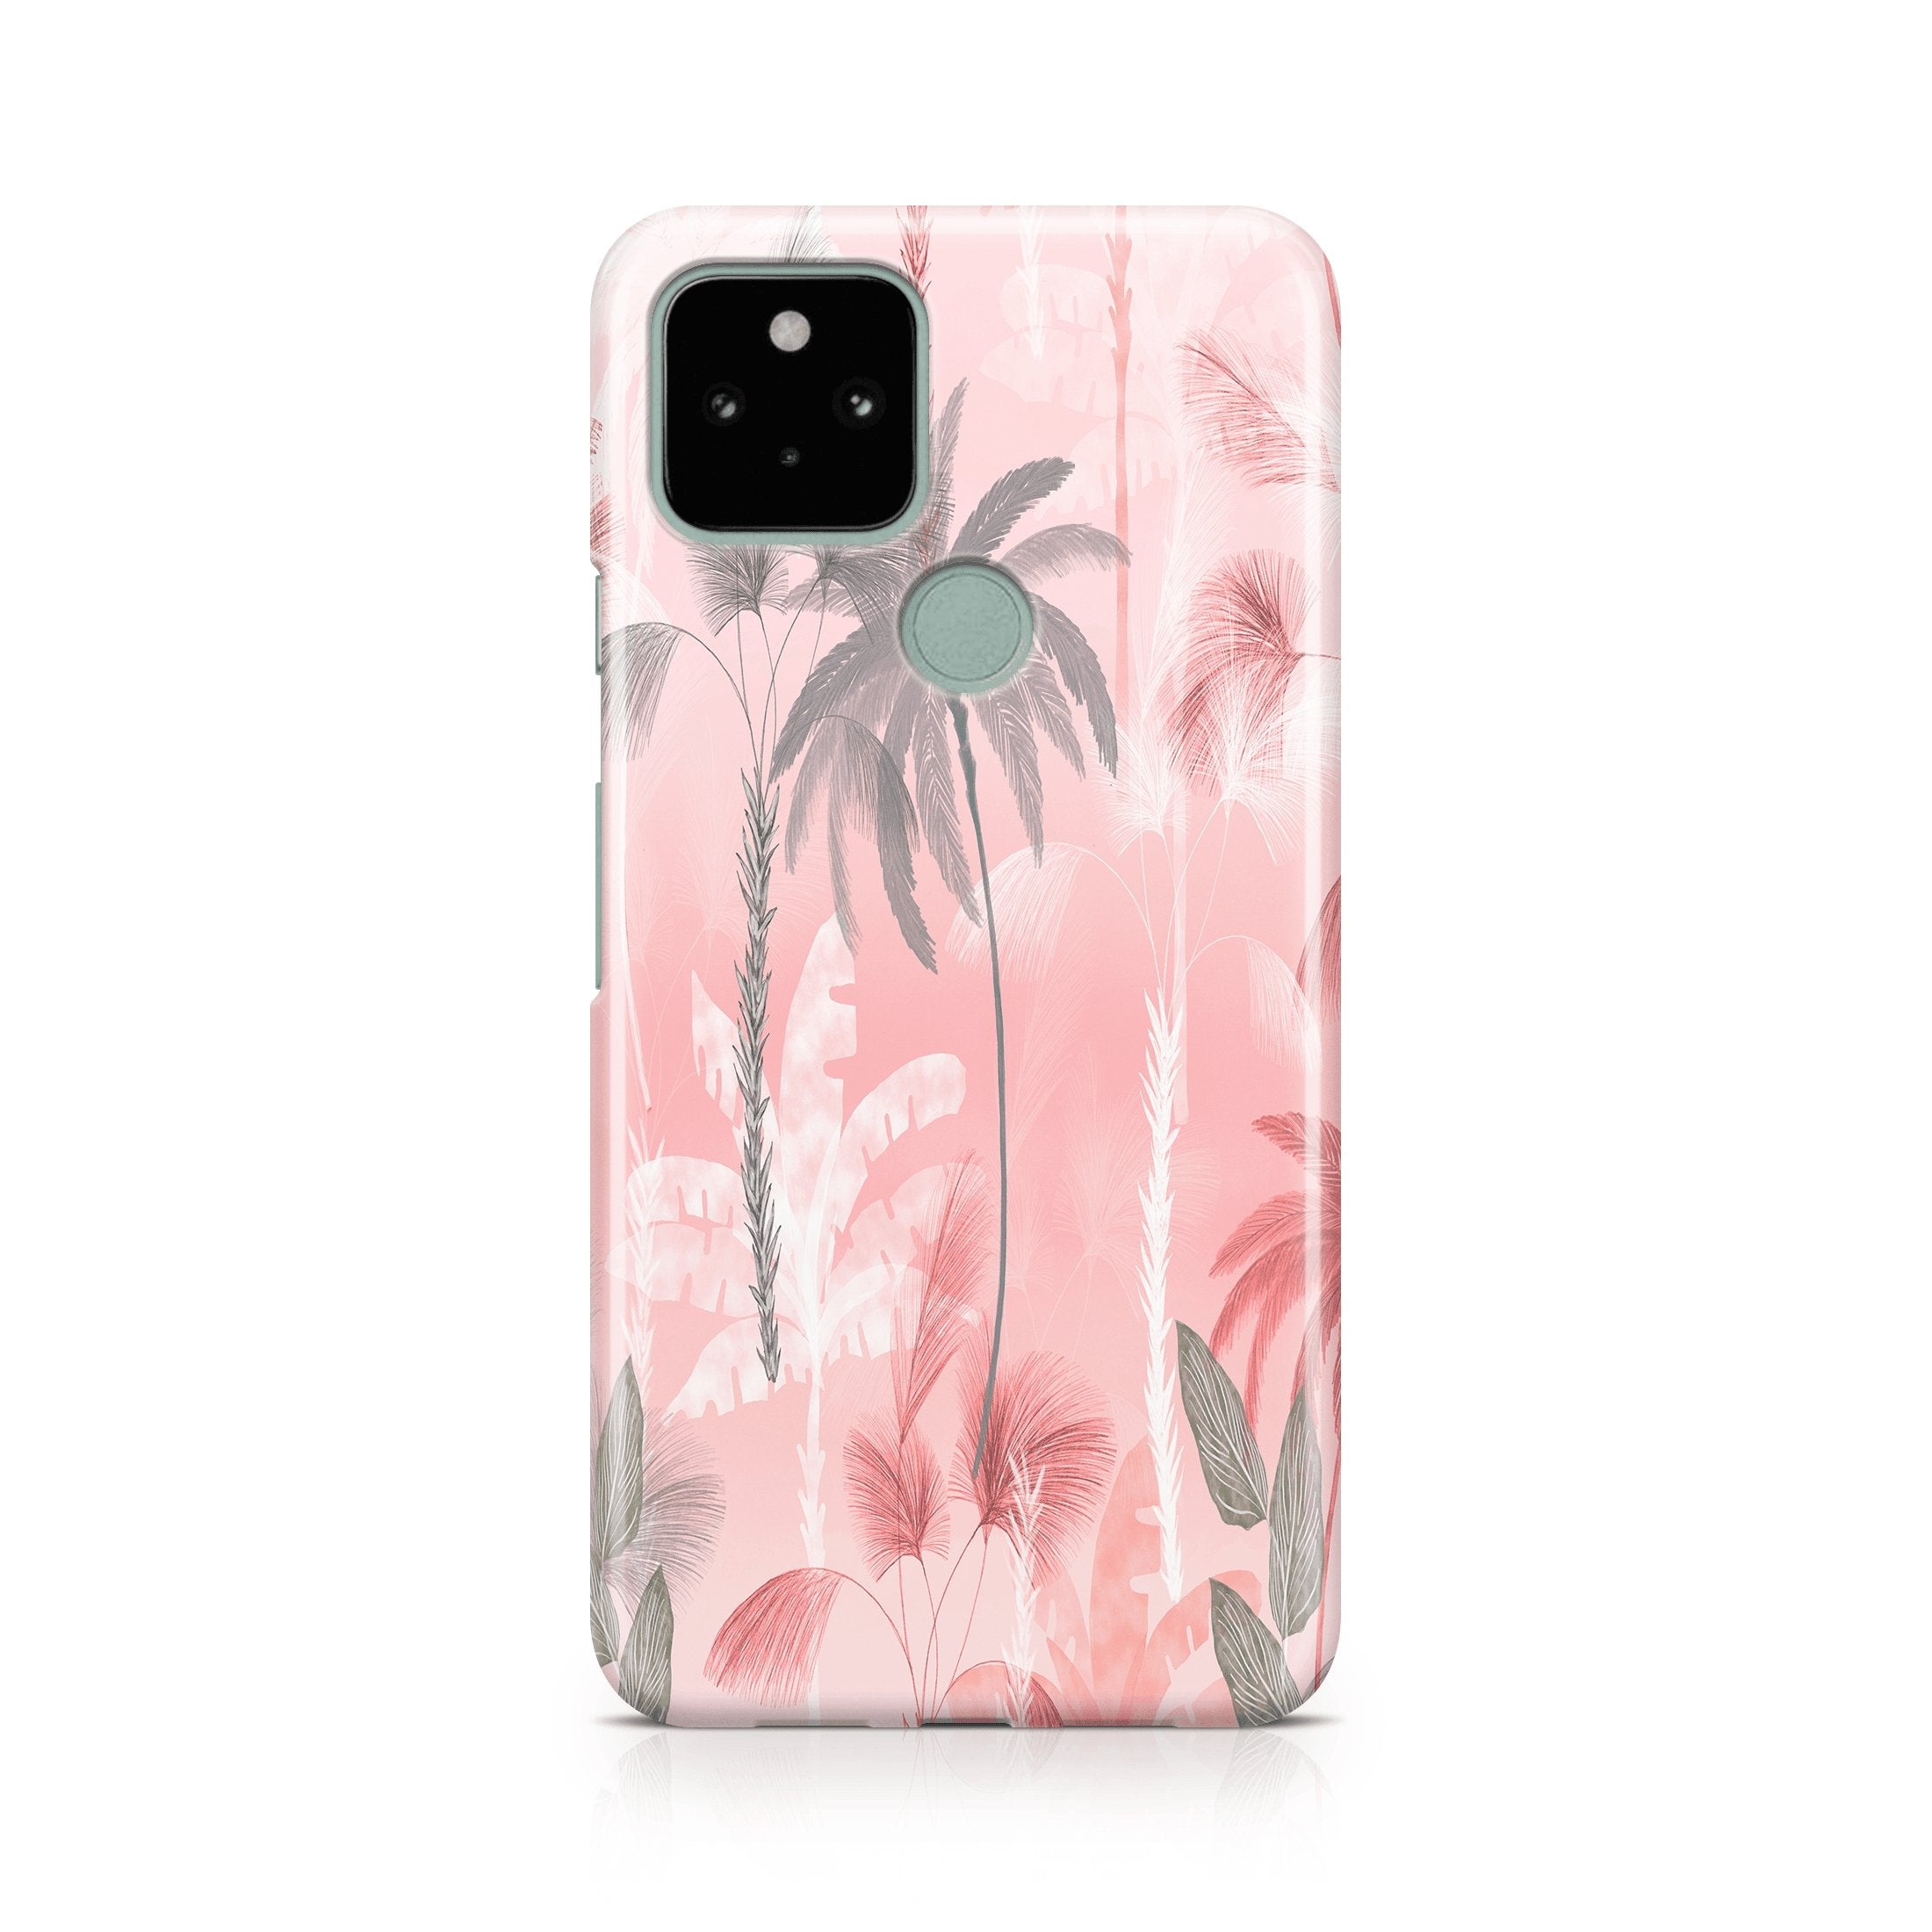 Smoothie Tropical - Google phone case designs by CaseSwagger